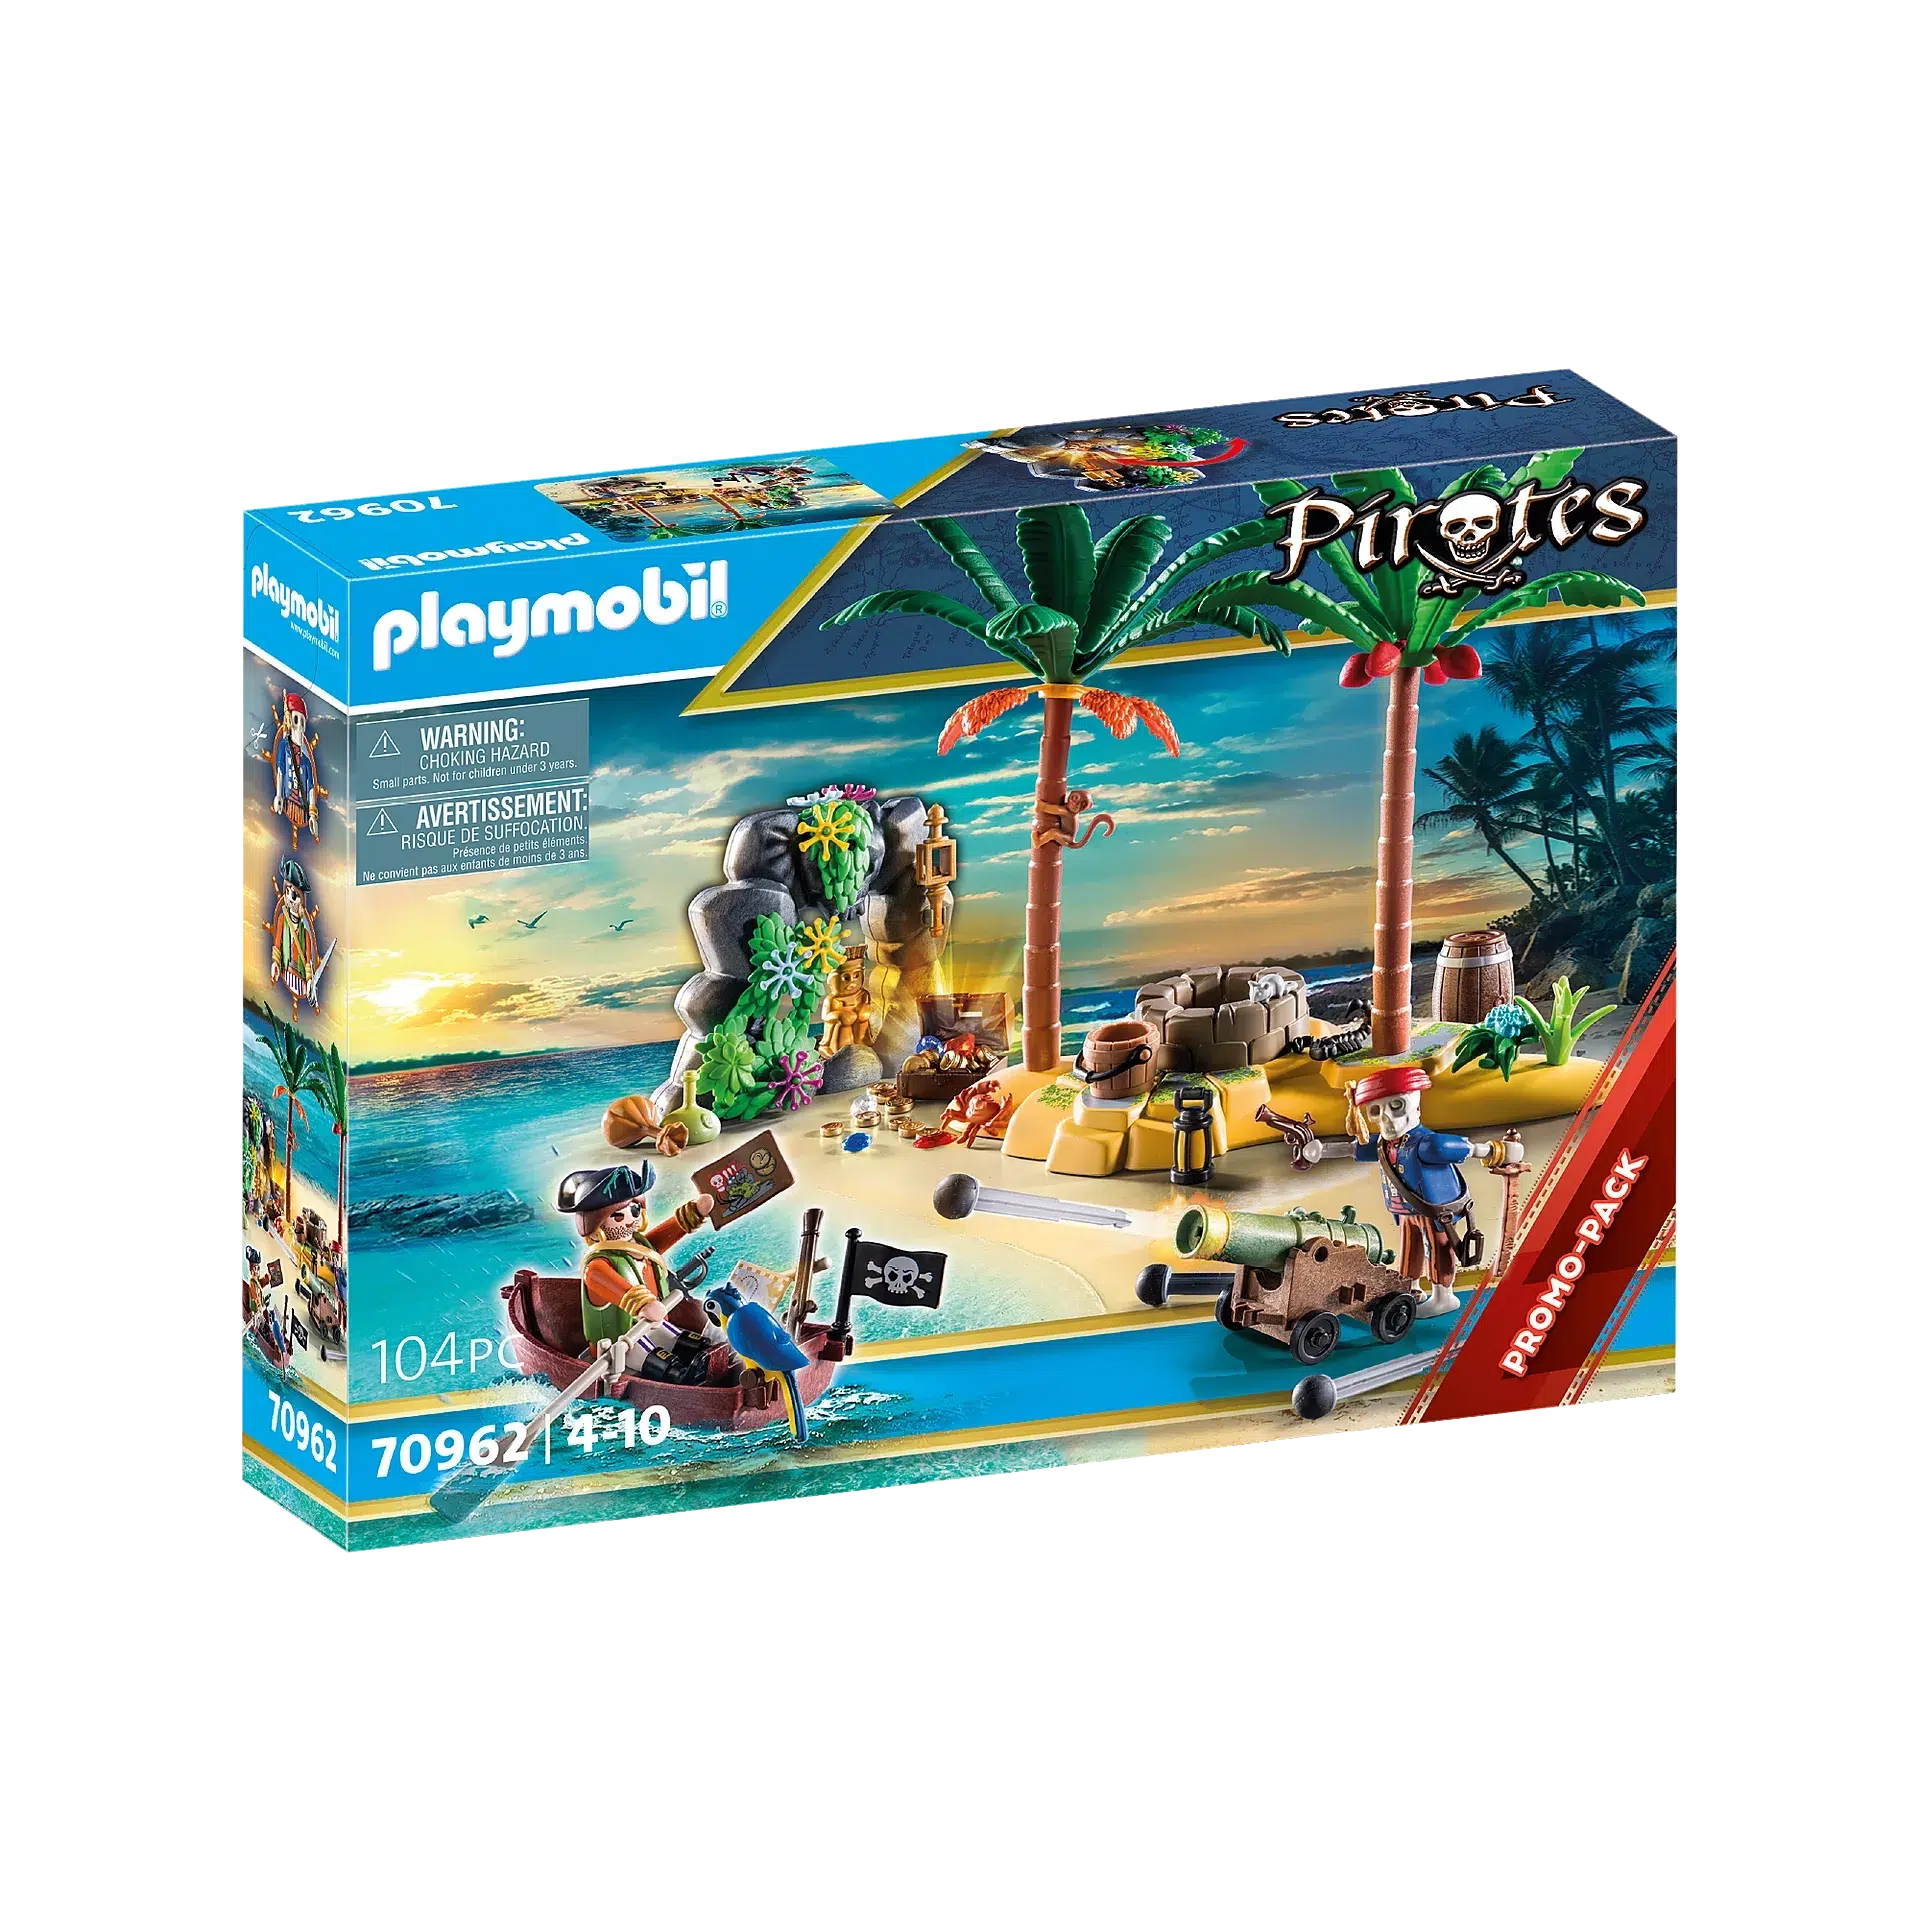 Playmobil-Pirates - Pirate Treasure Island with Rowboat-70962-Legacy Toys